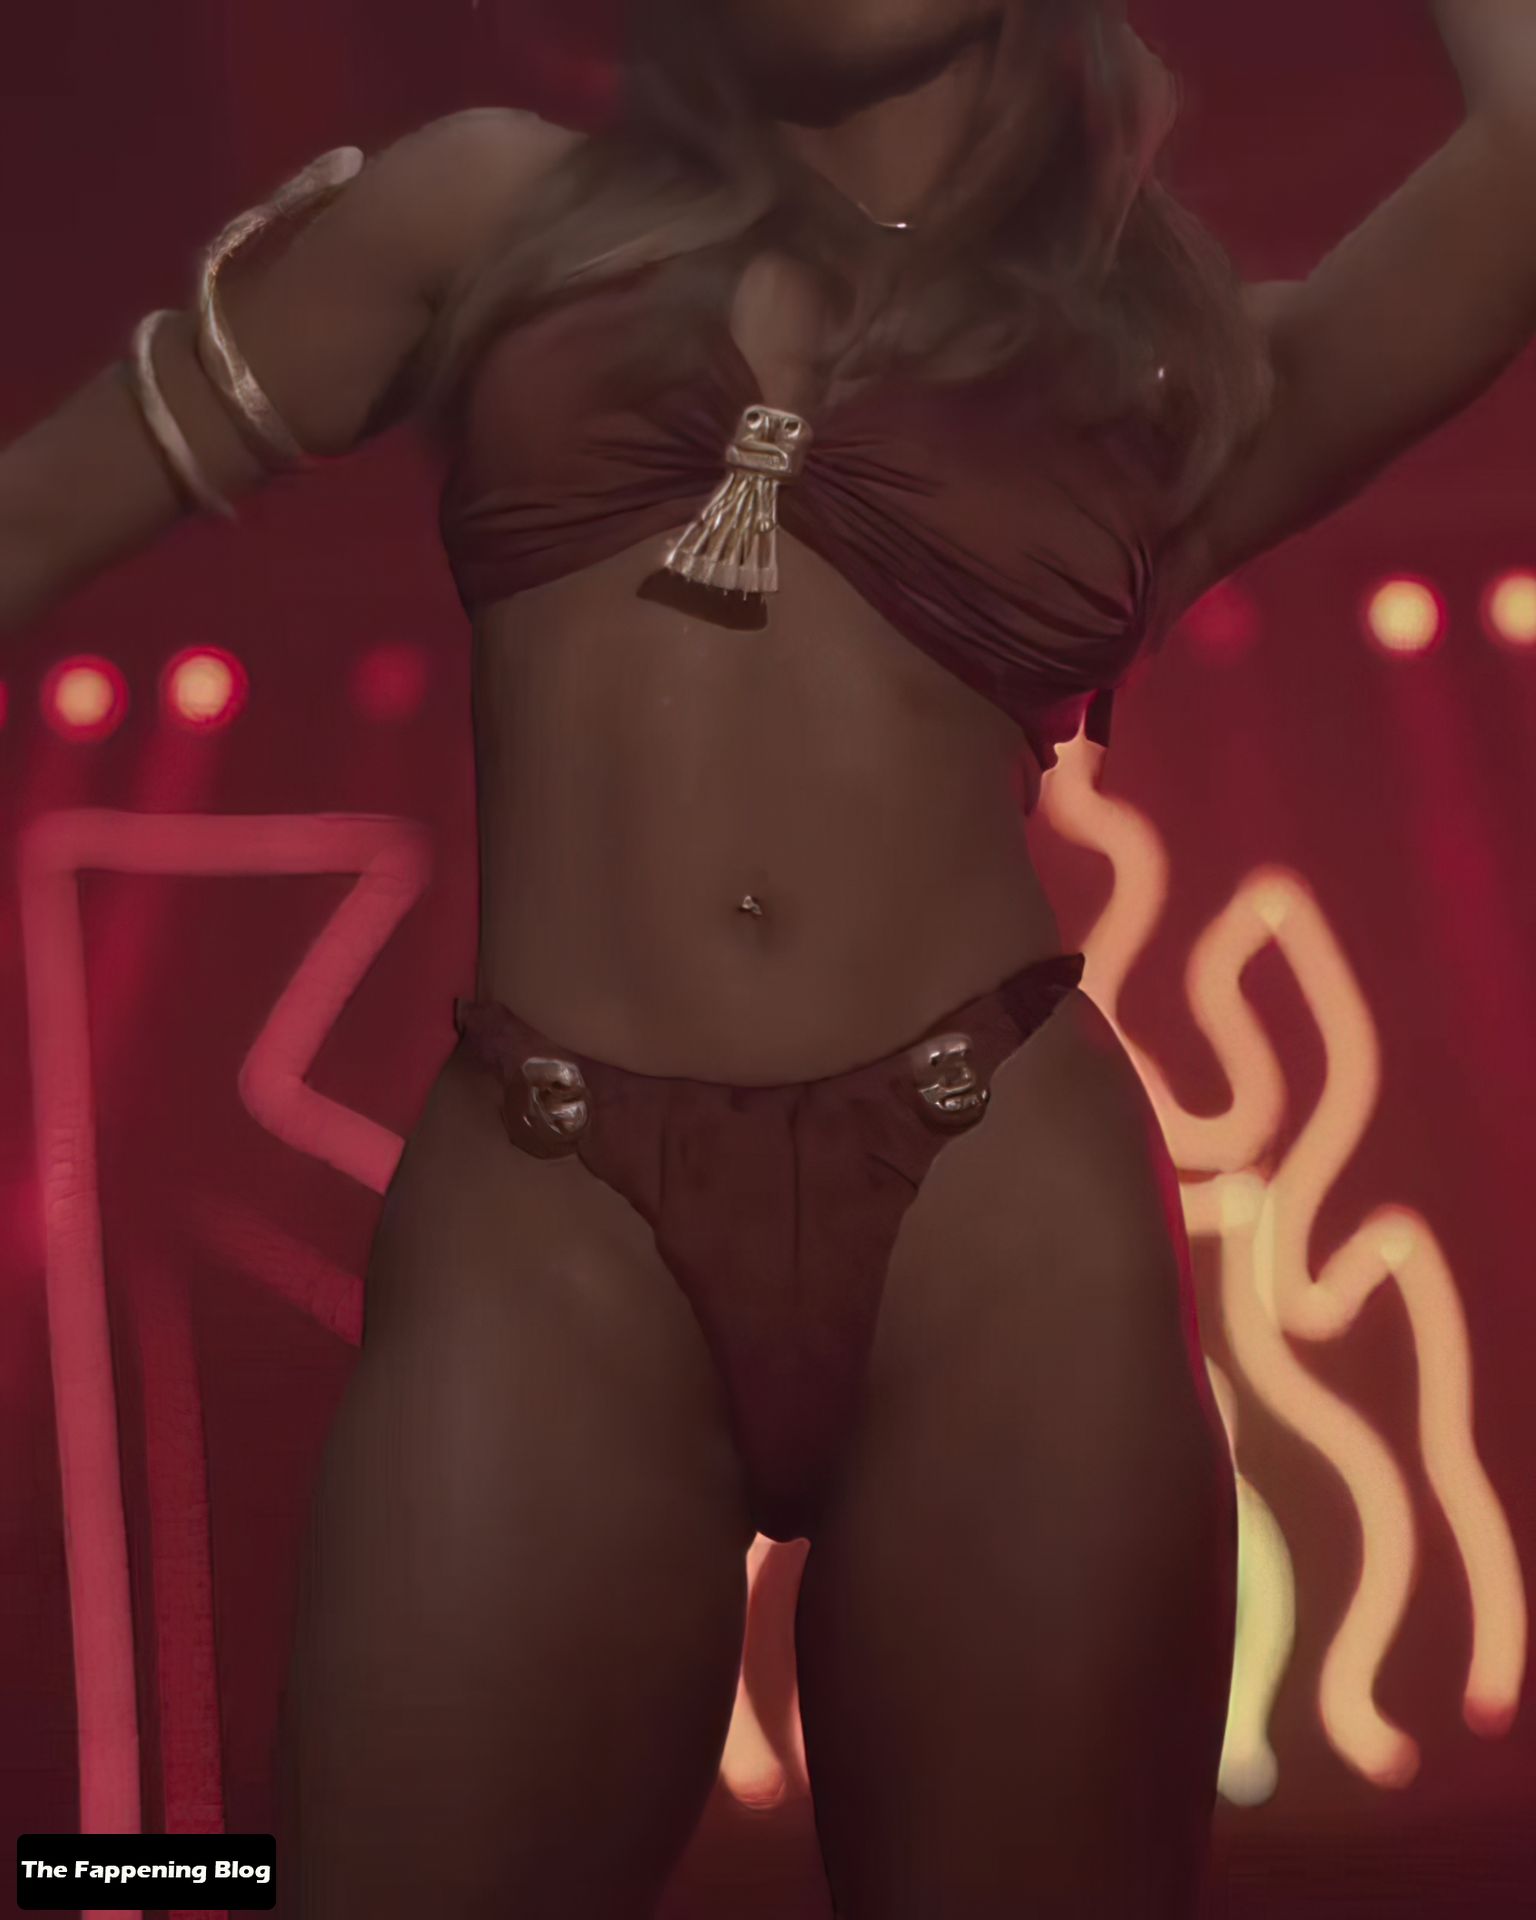 Normani-Sexy-Dance-in-Lingerie-2-1-thefappeningblog.com_.jpg